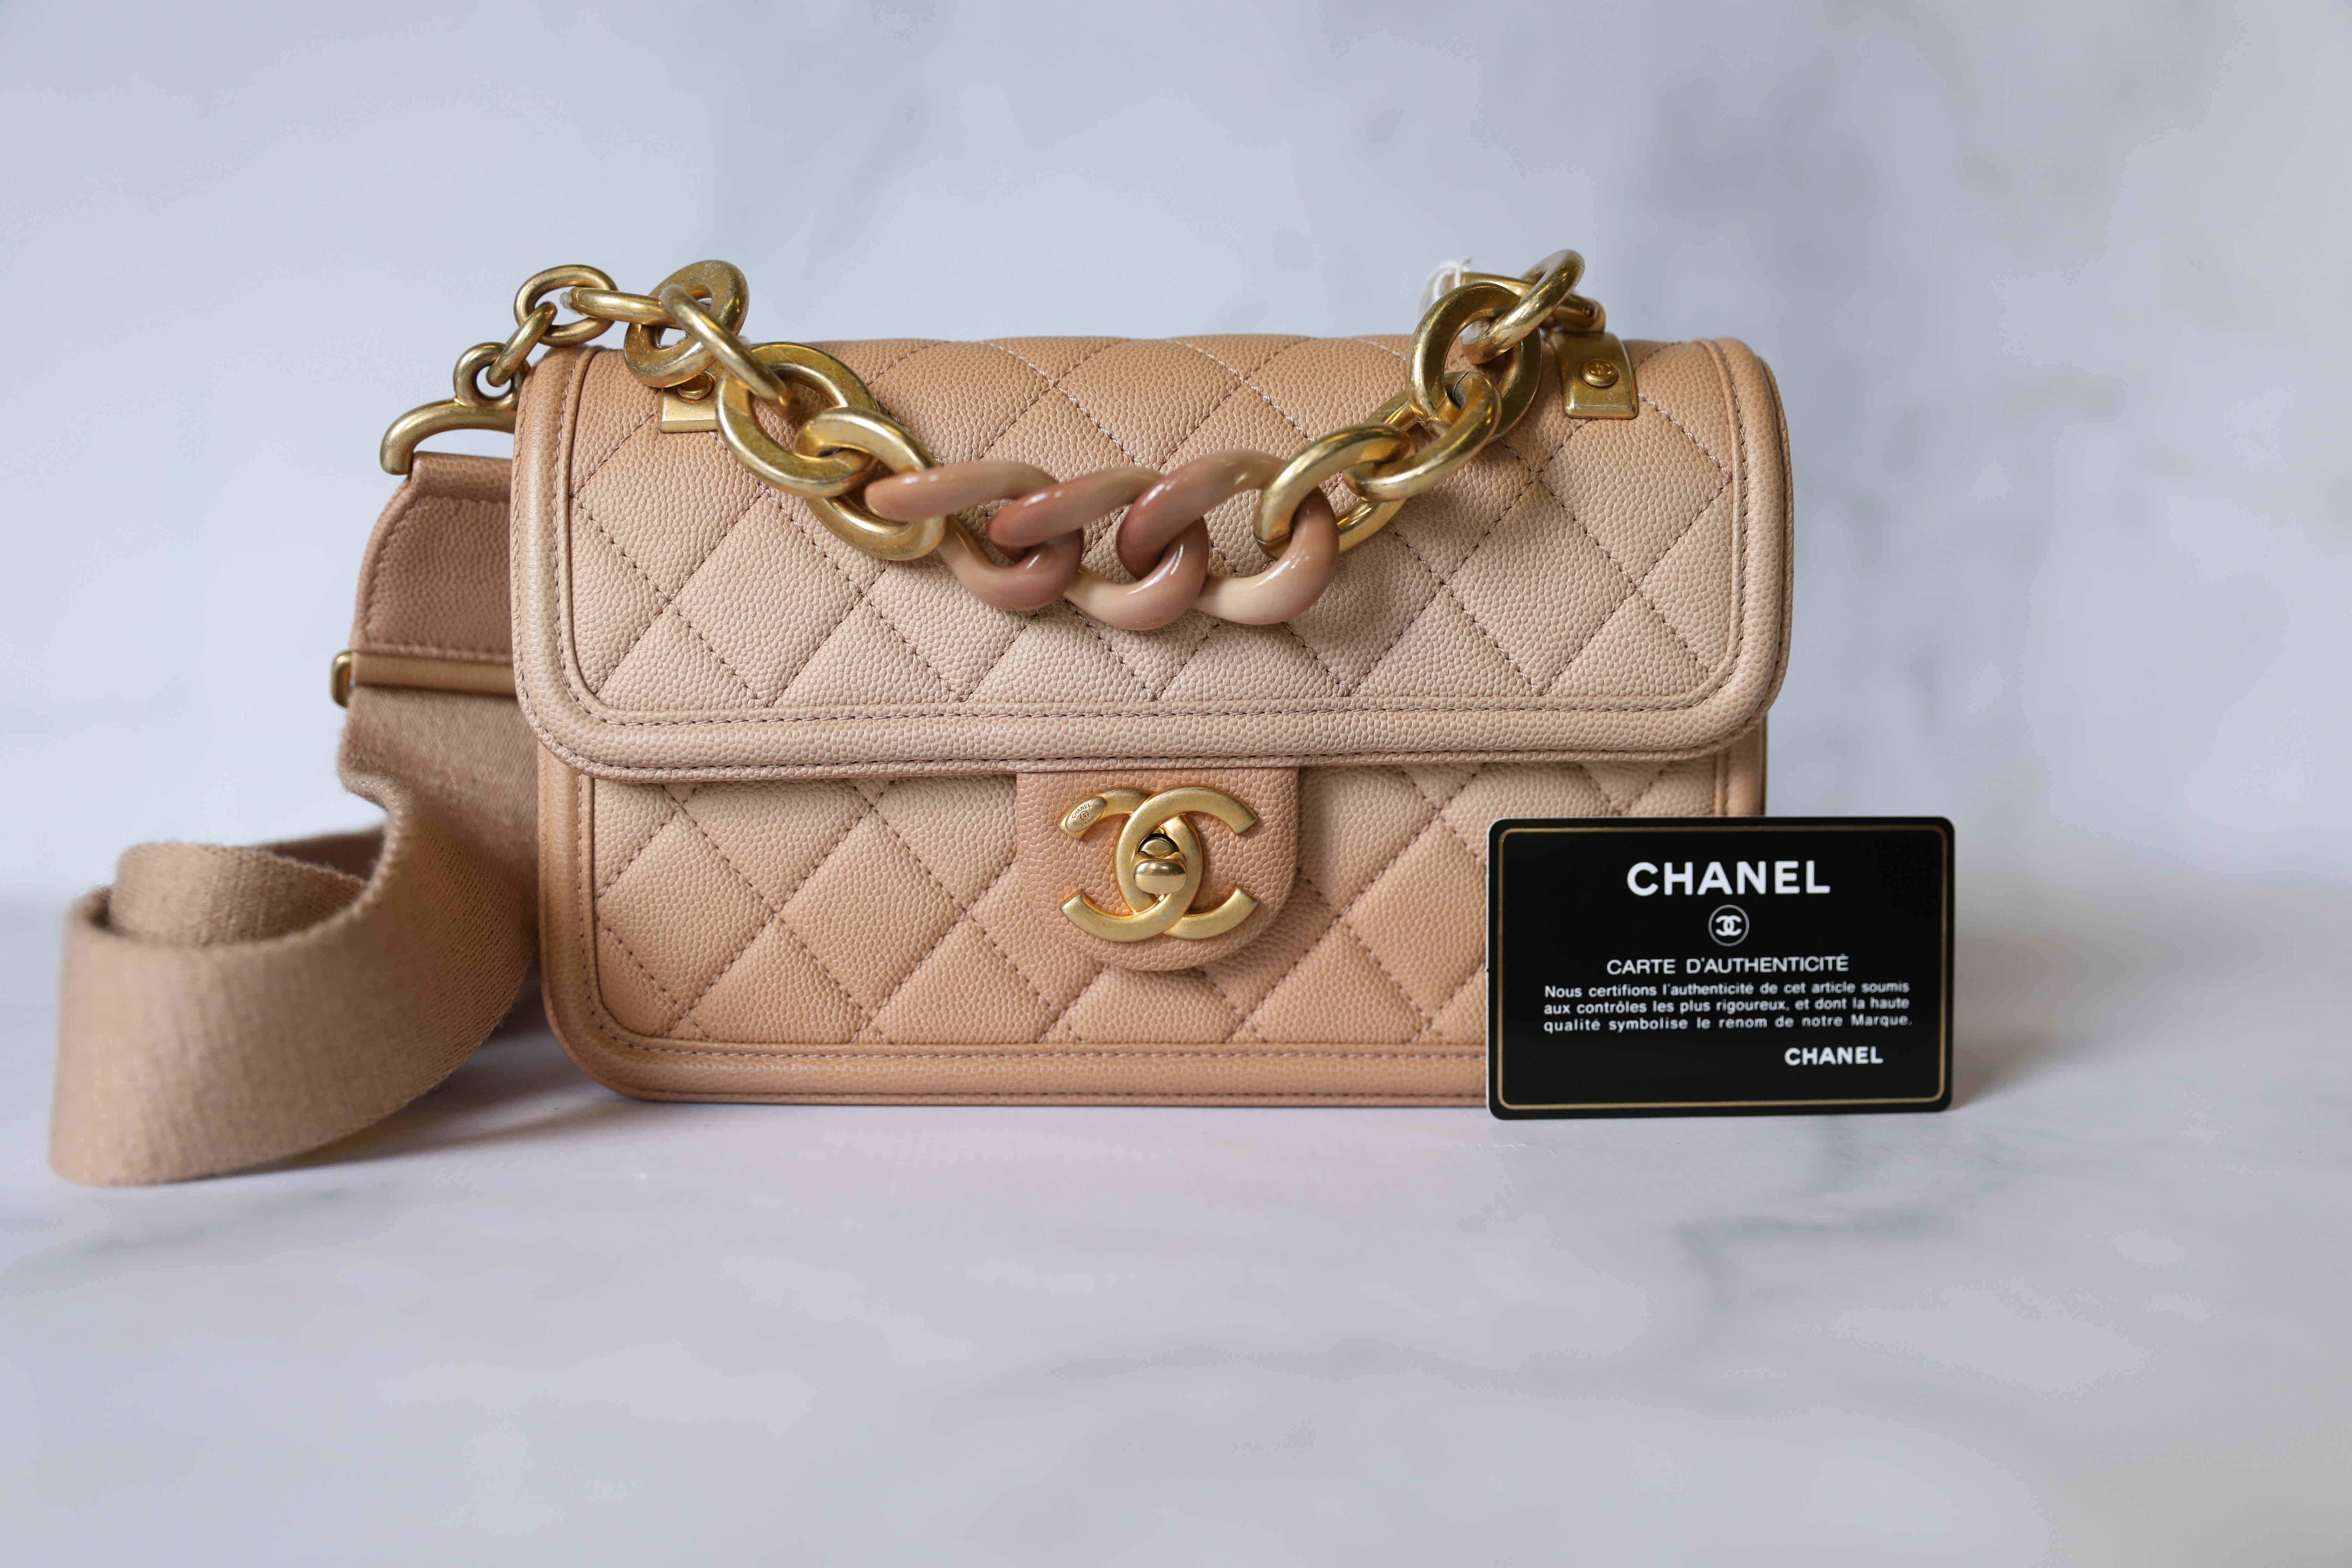 Chanel Sunset By The Sea Bag Small, Blue Caviar Leather Ombre, Preowned in  Box - Julia Rose Boston